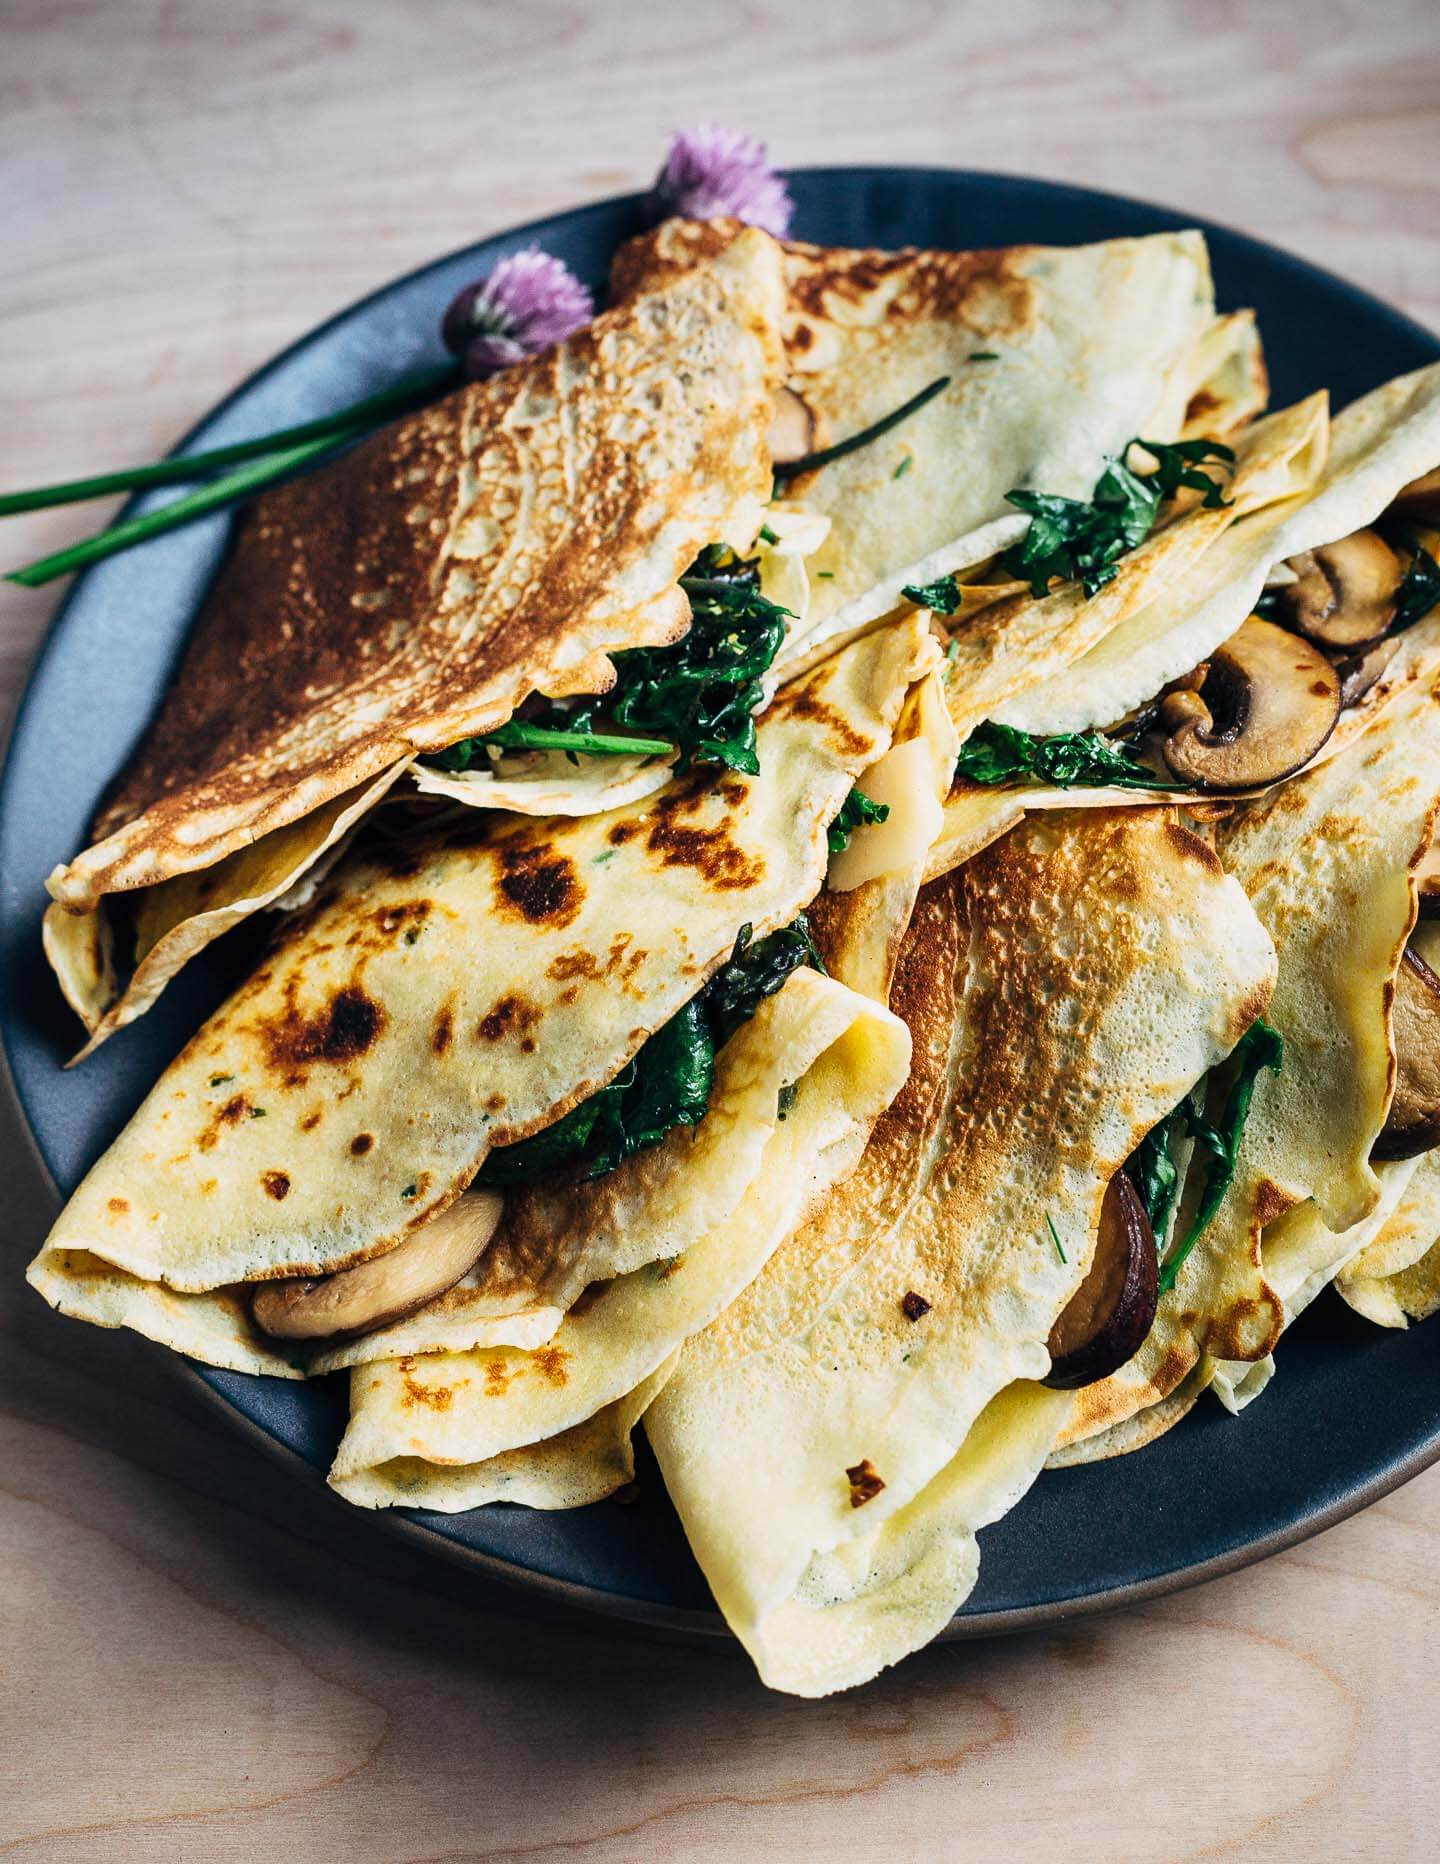 Savory crepes with mushrooms and greens. 